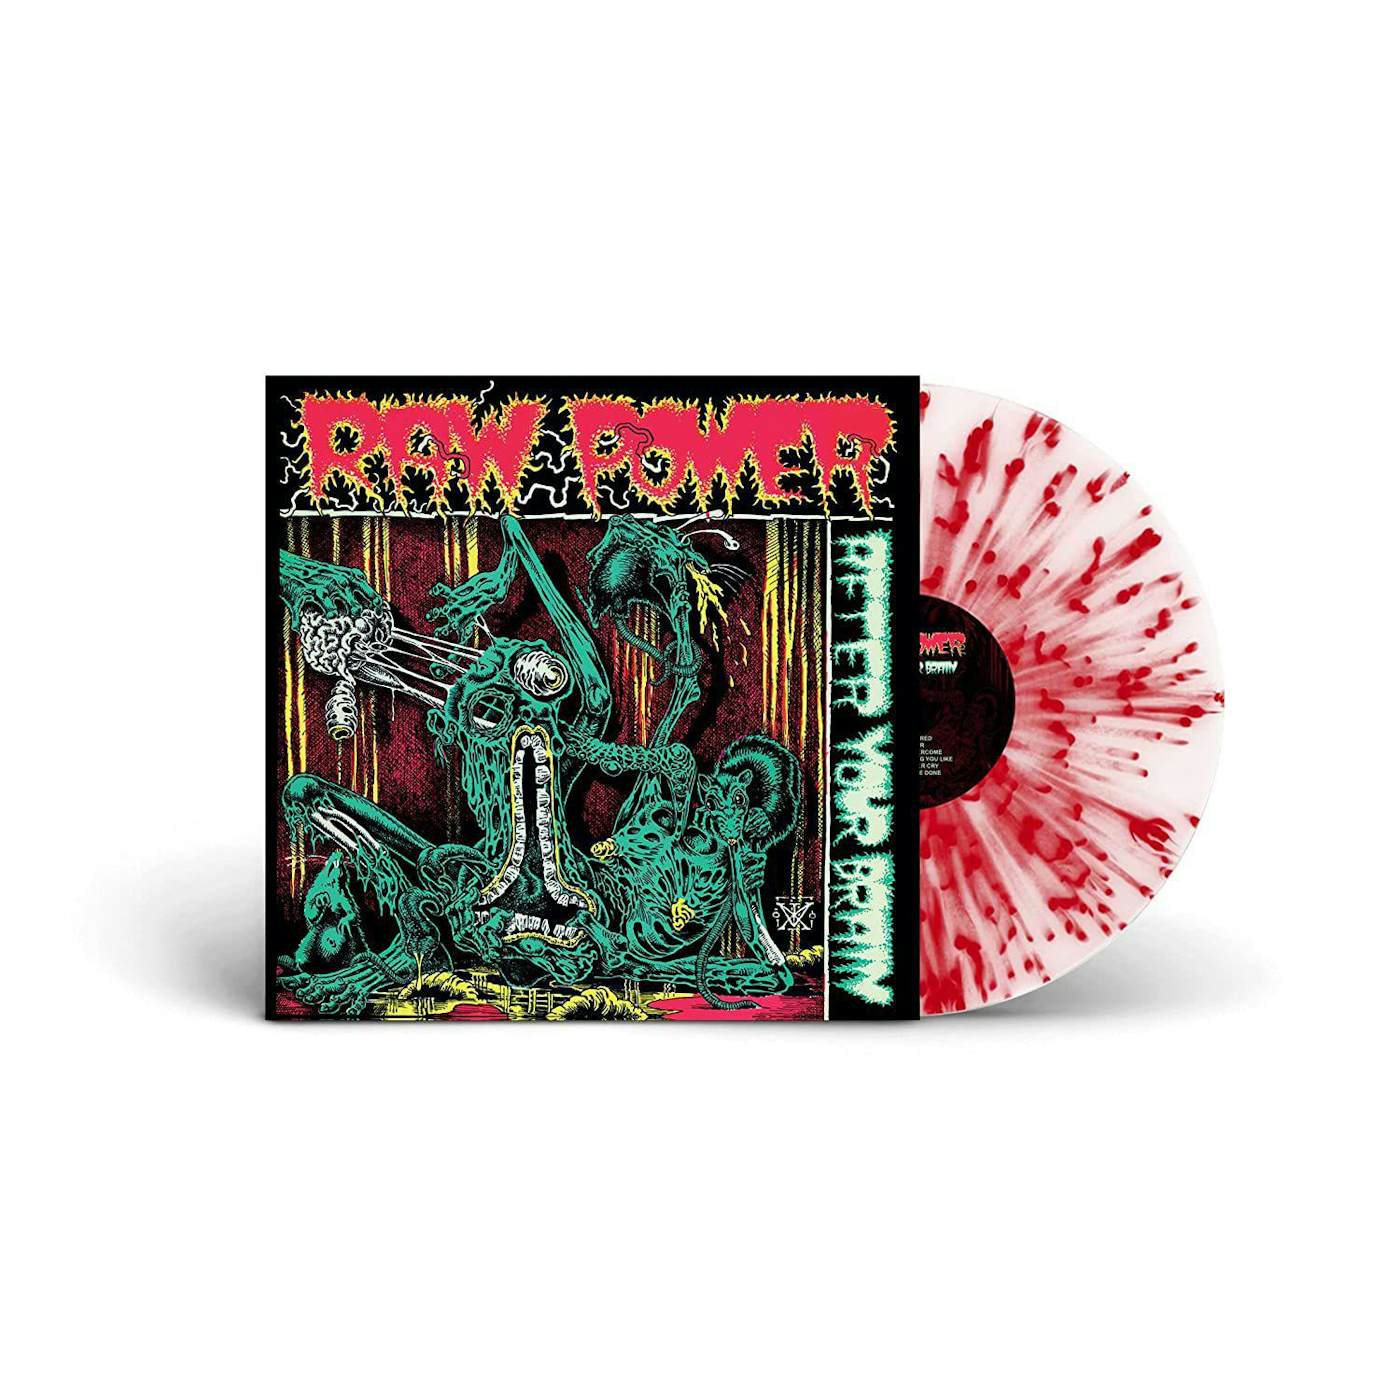 Raw Power After Your Brain (White/Red Splatter) Vinyl Record